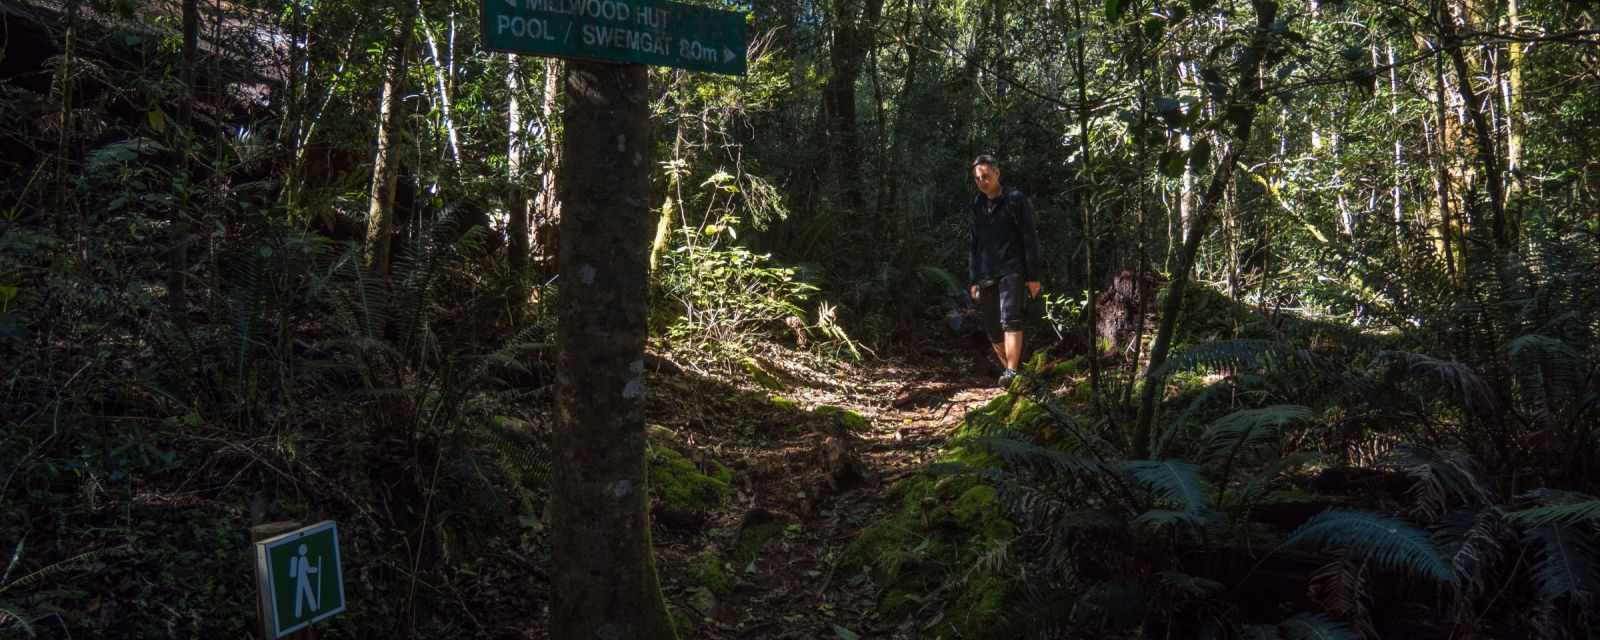 Jubilee Creek Picnic Site and Hike in the Knysna Forest